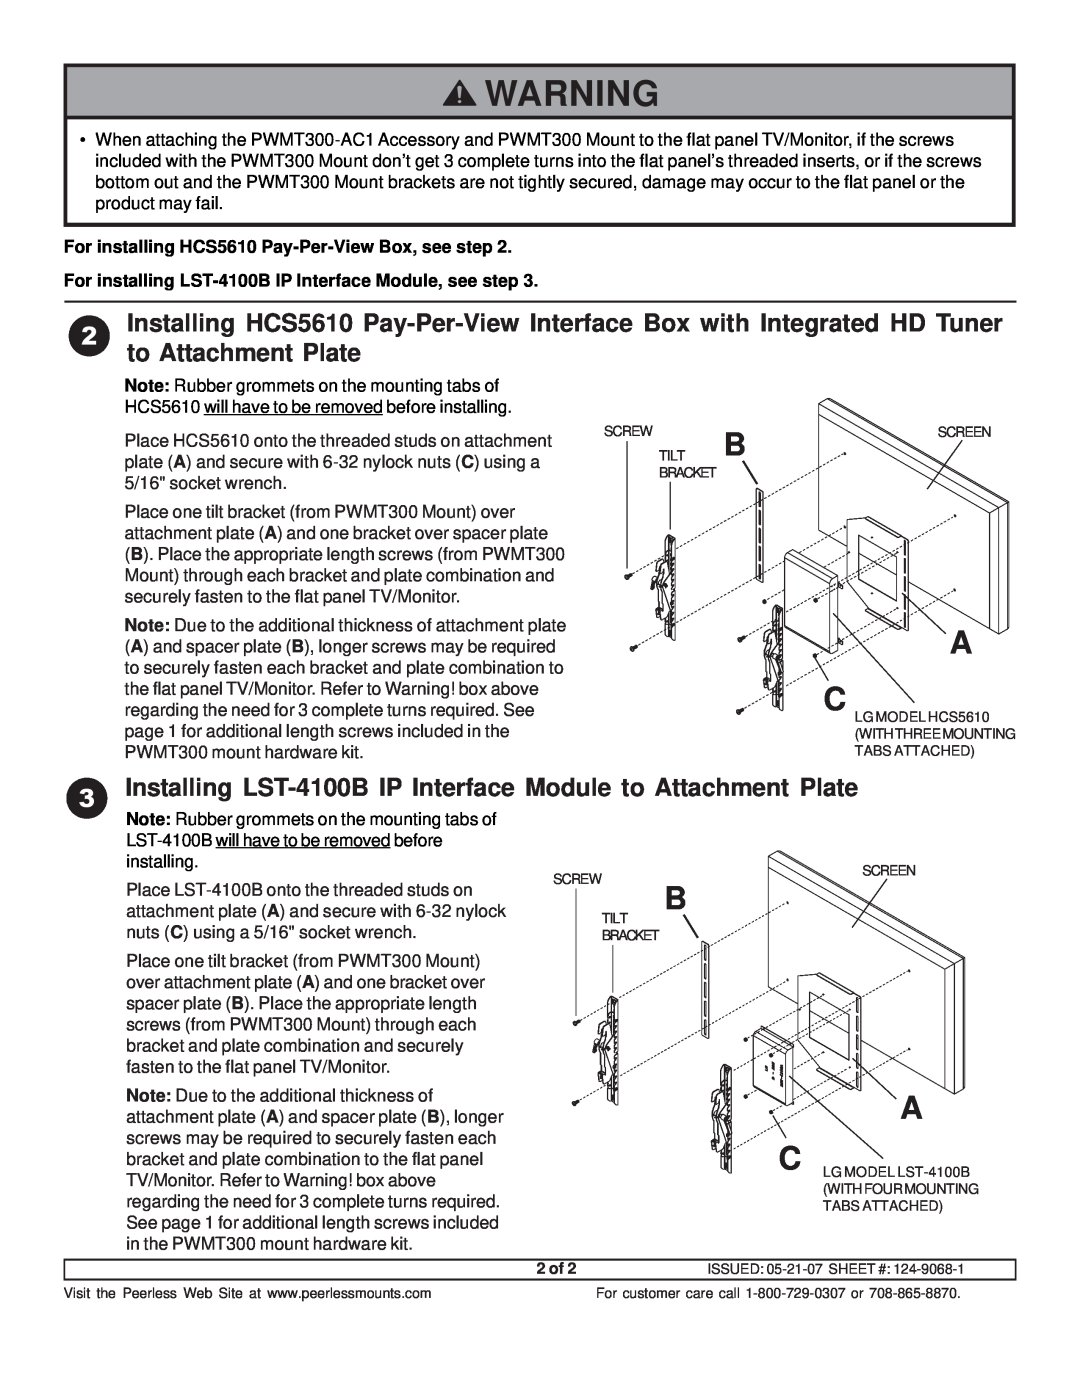 LG Electronics PWMT300-AC1 instruction sheet Installing LST-4100B IP Interface Module to Attachment Plate 